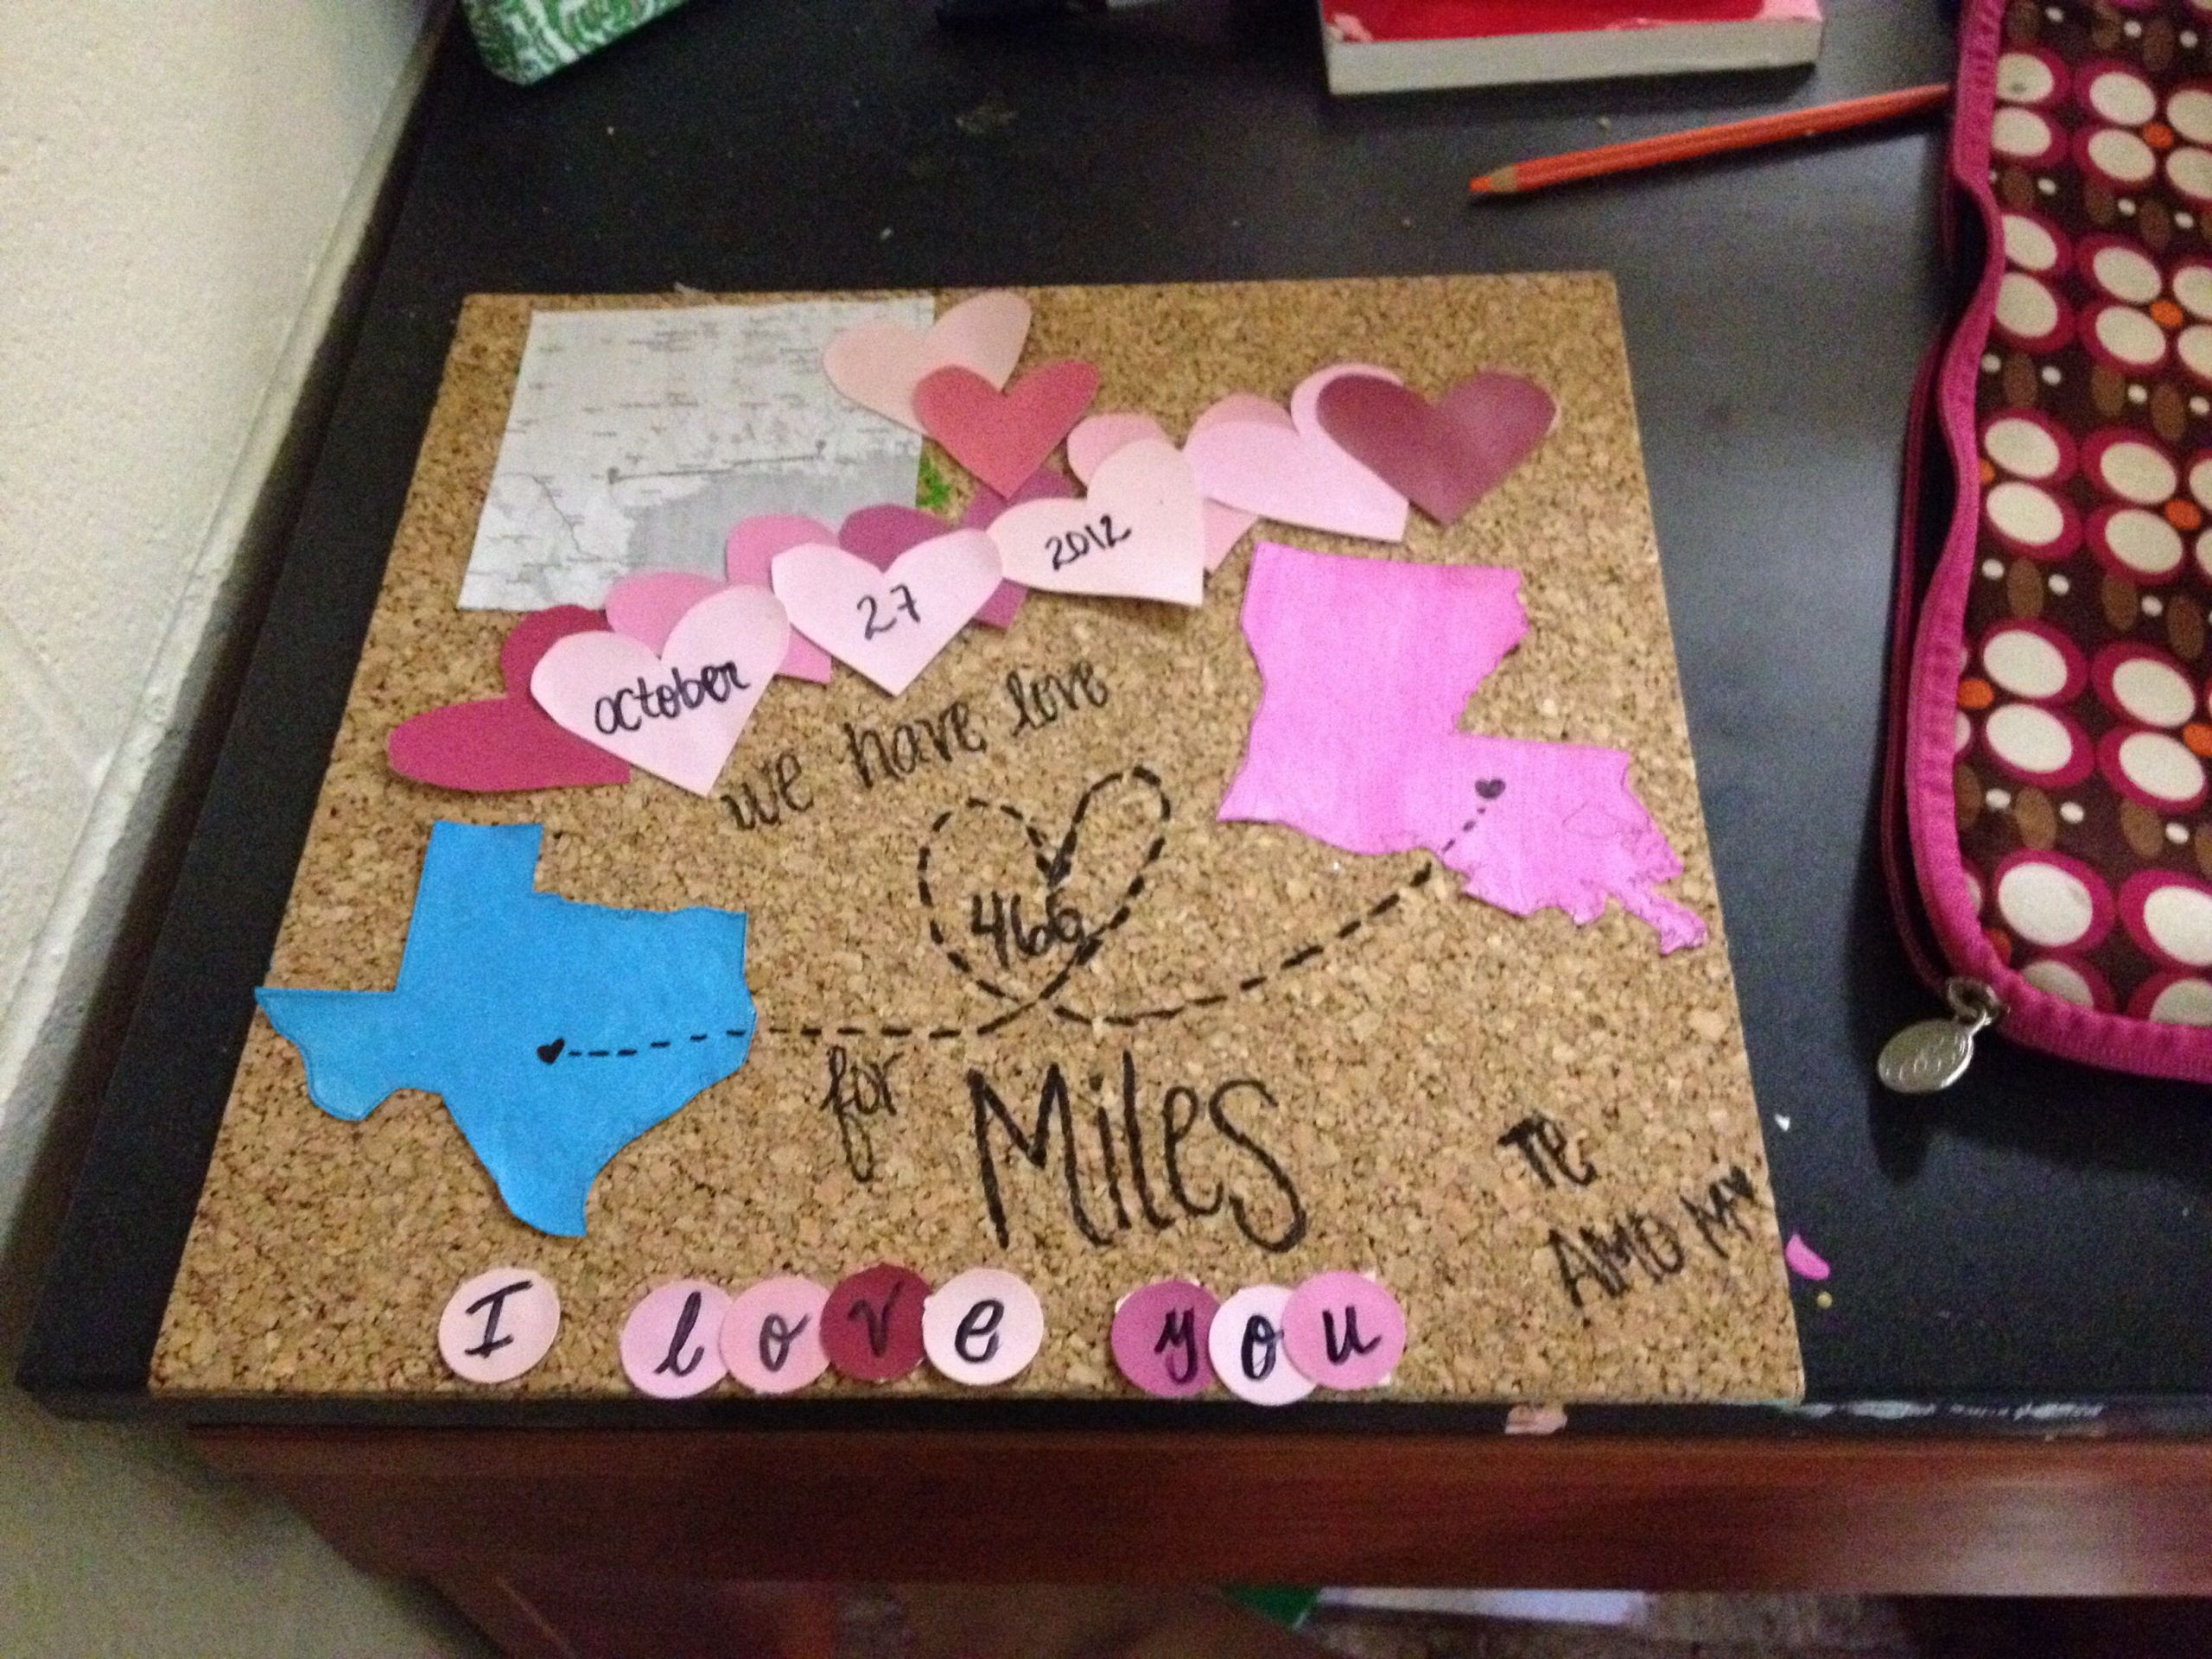 Long Distance Relationship Gift Ideas For Girlfriend
 Scrapbook Page Ideas For Boyfriend Anniversary Gift For My